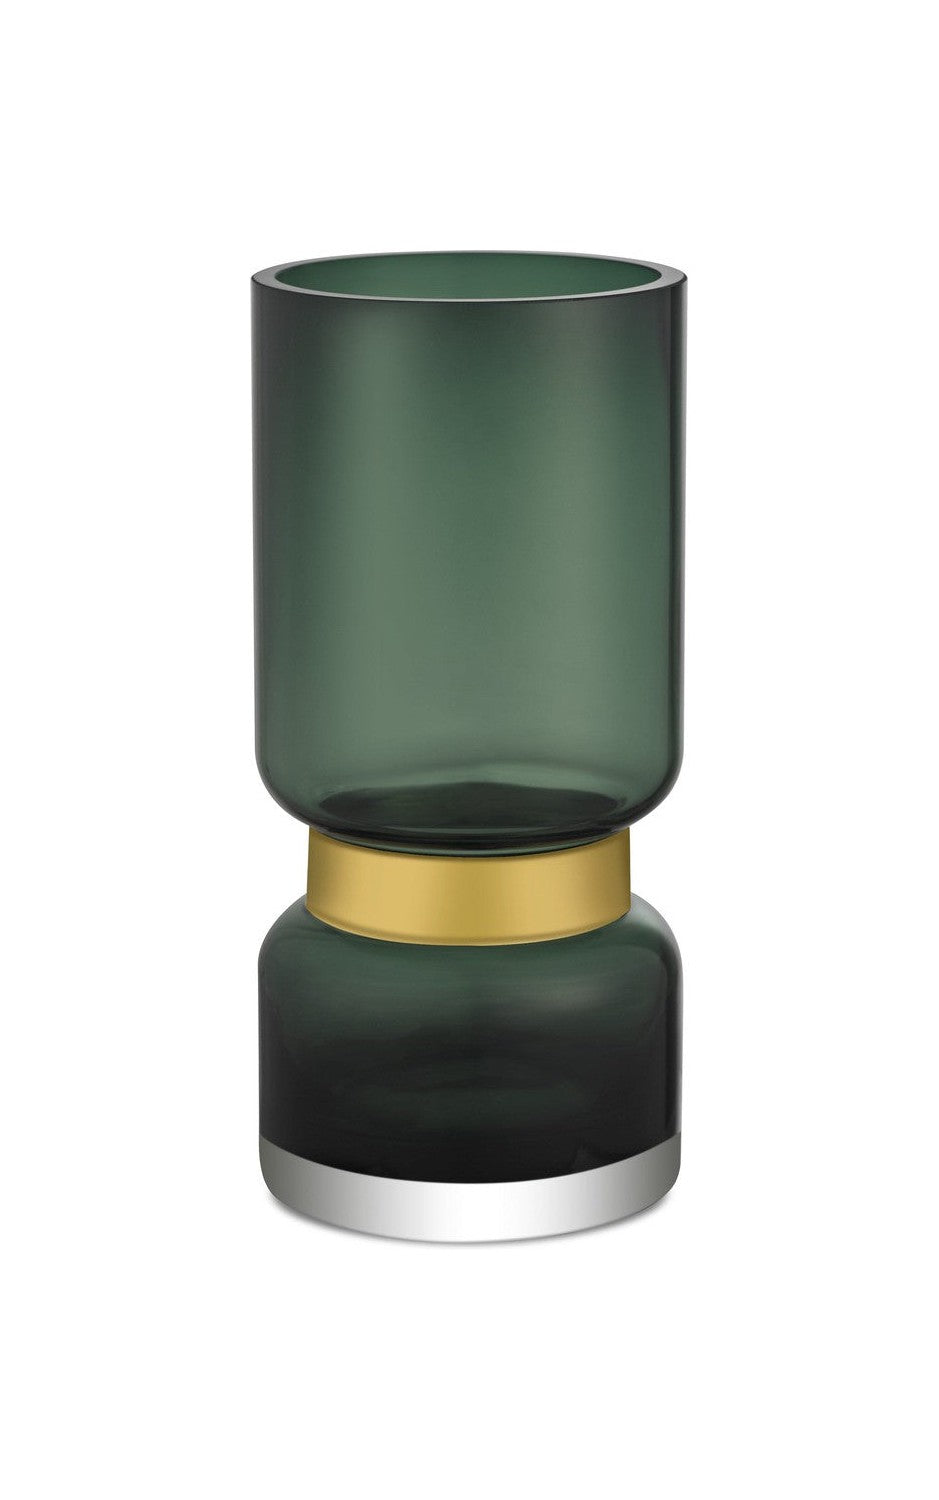 Classic Luxury Design tall vase made to perfection, green Glass TRIER